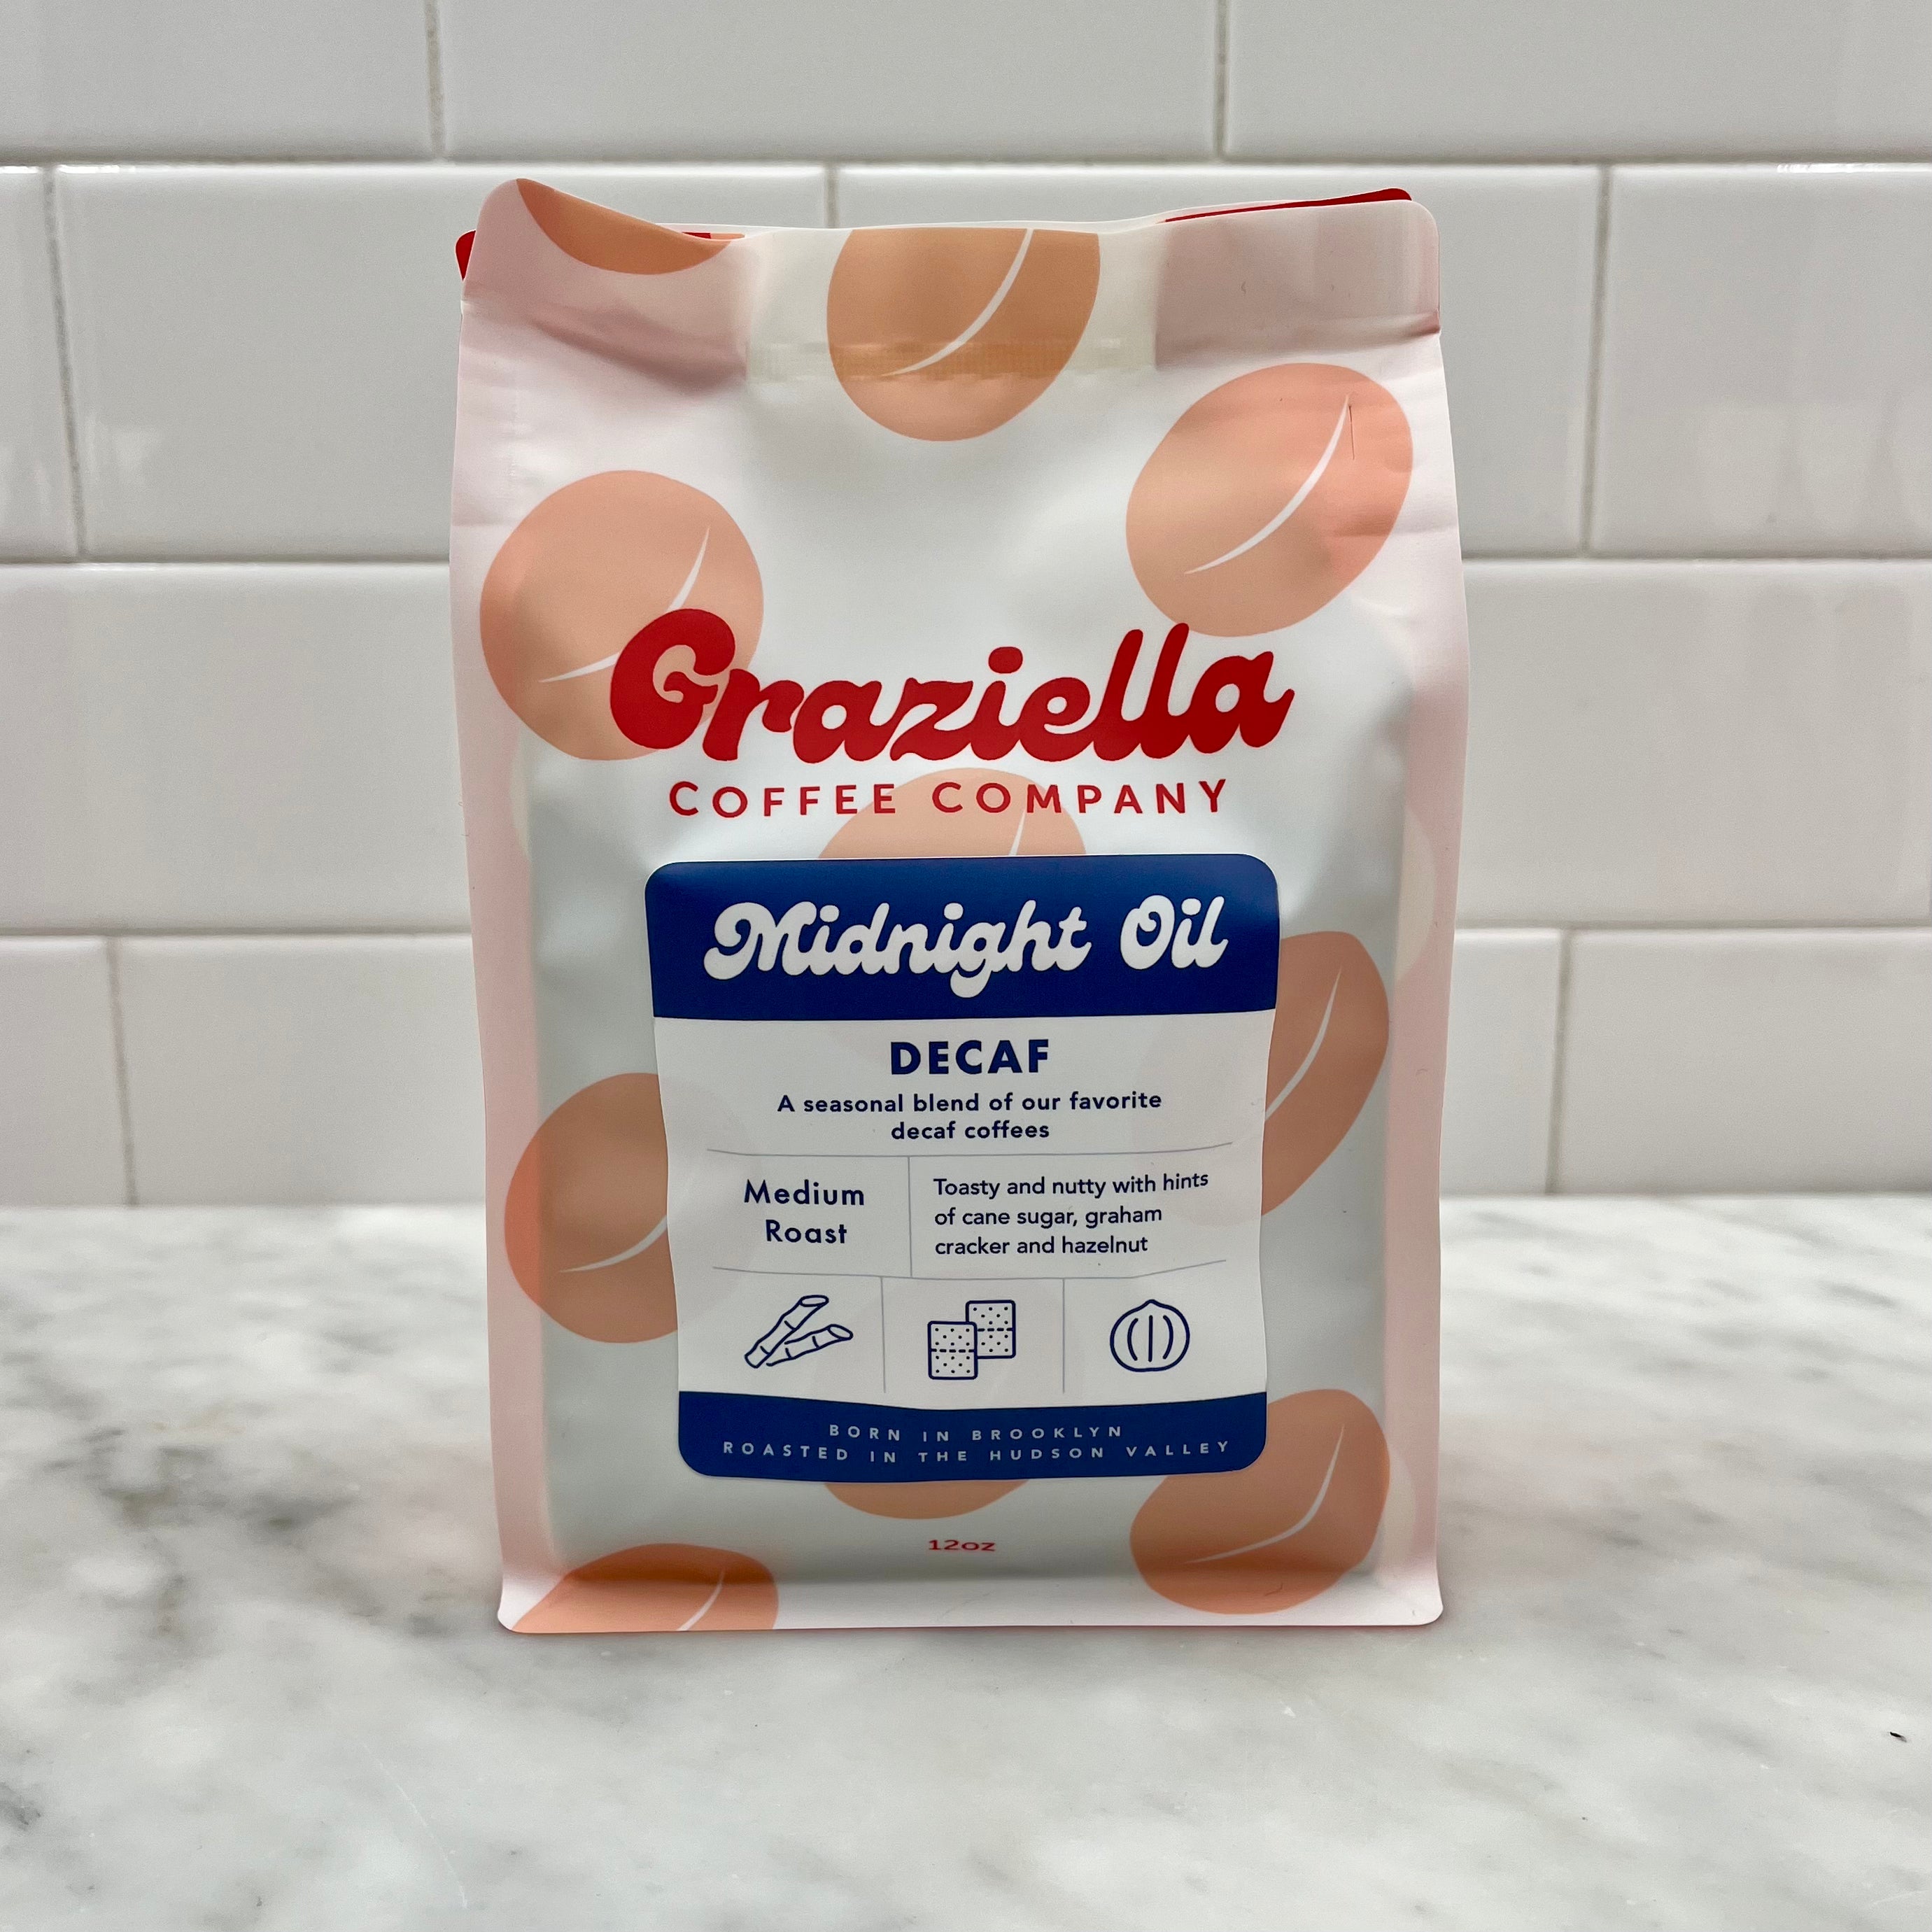 Bag of Grazziella Coffee Company Decaf on a kitchen counter.